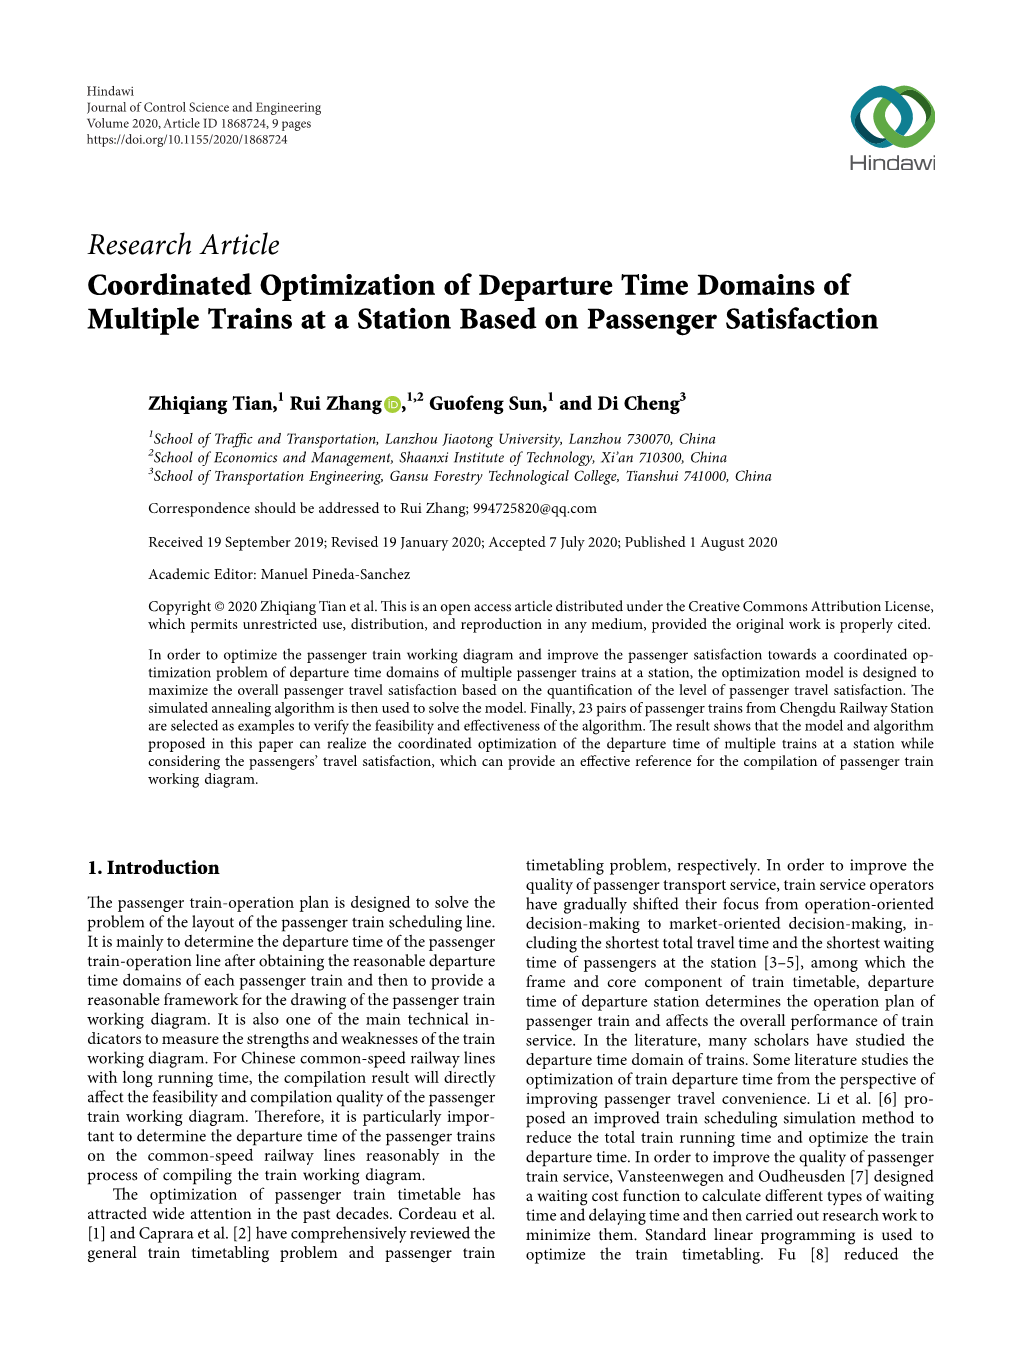 Coordinated Optimization of Departure Time Domains of Multiple Trains at a Station Based on Passenger Satisfaction